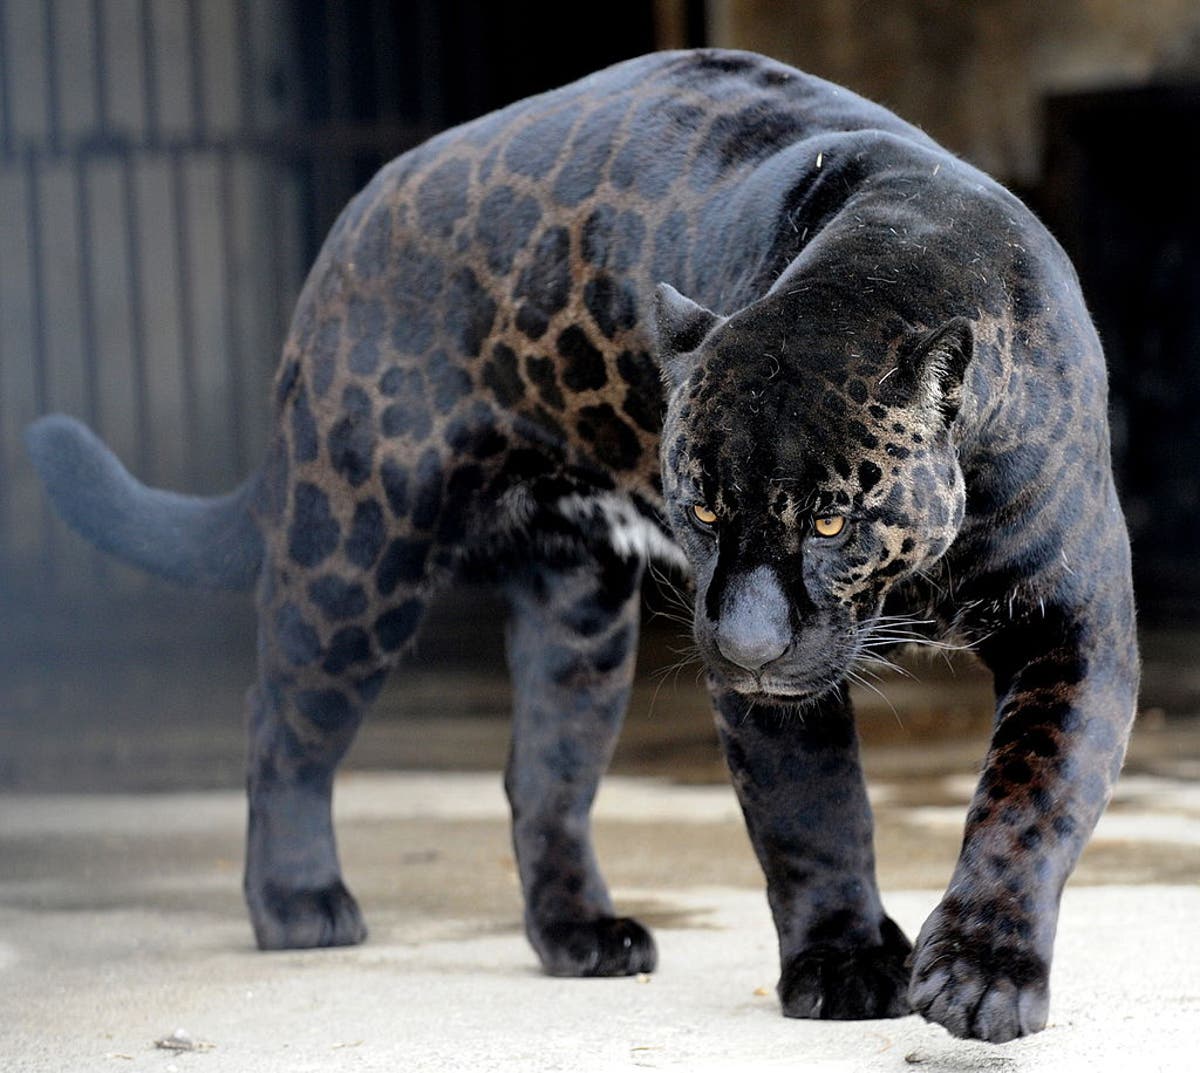 A Texas man claimed he saw a black panther in his backyard